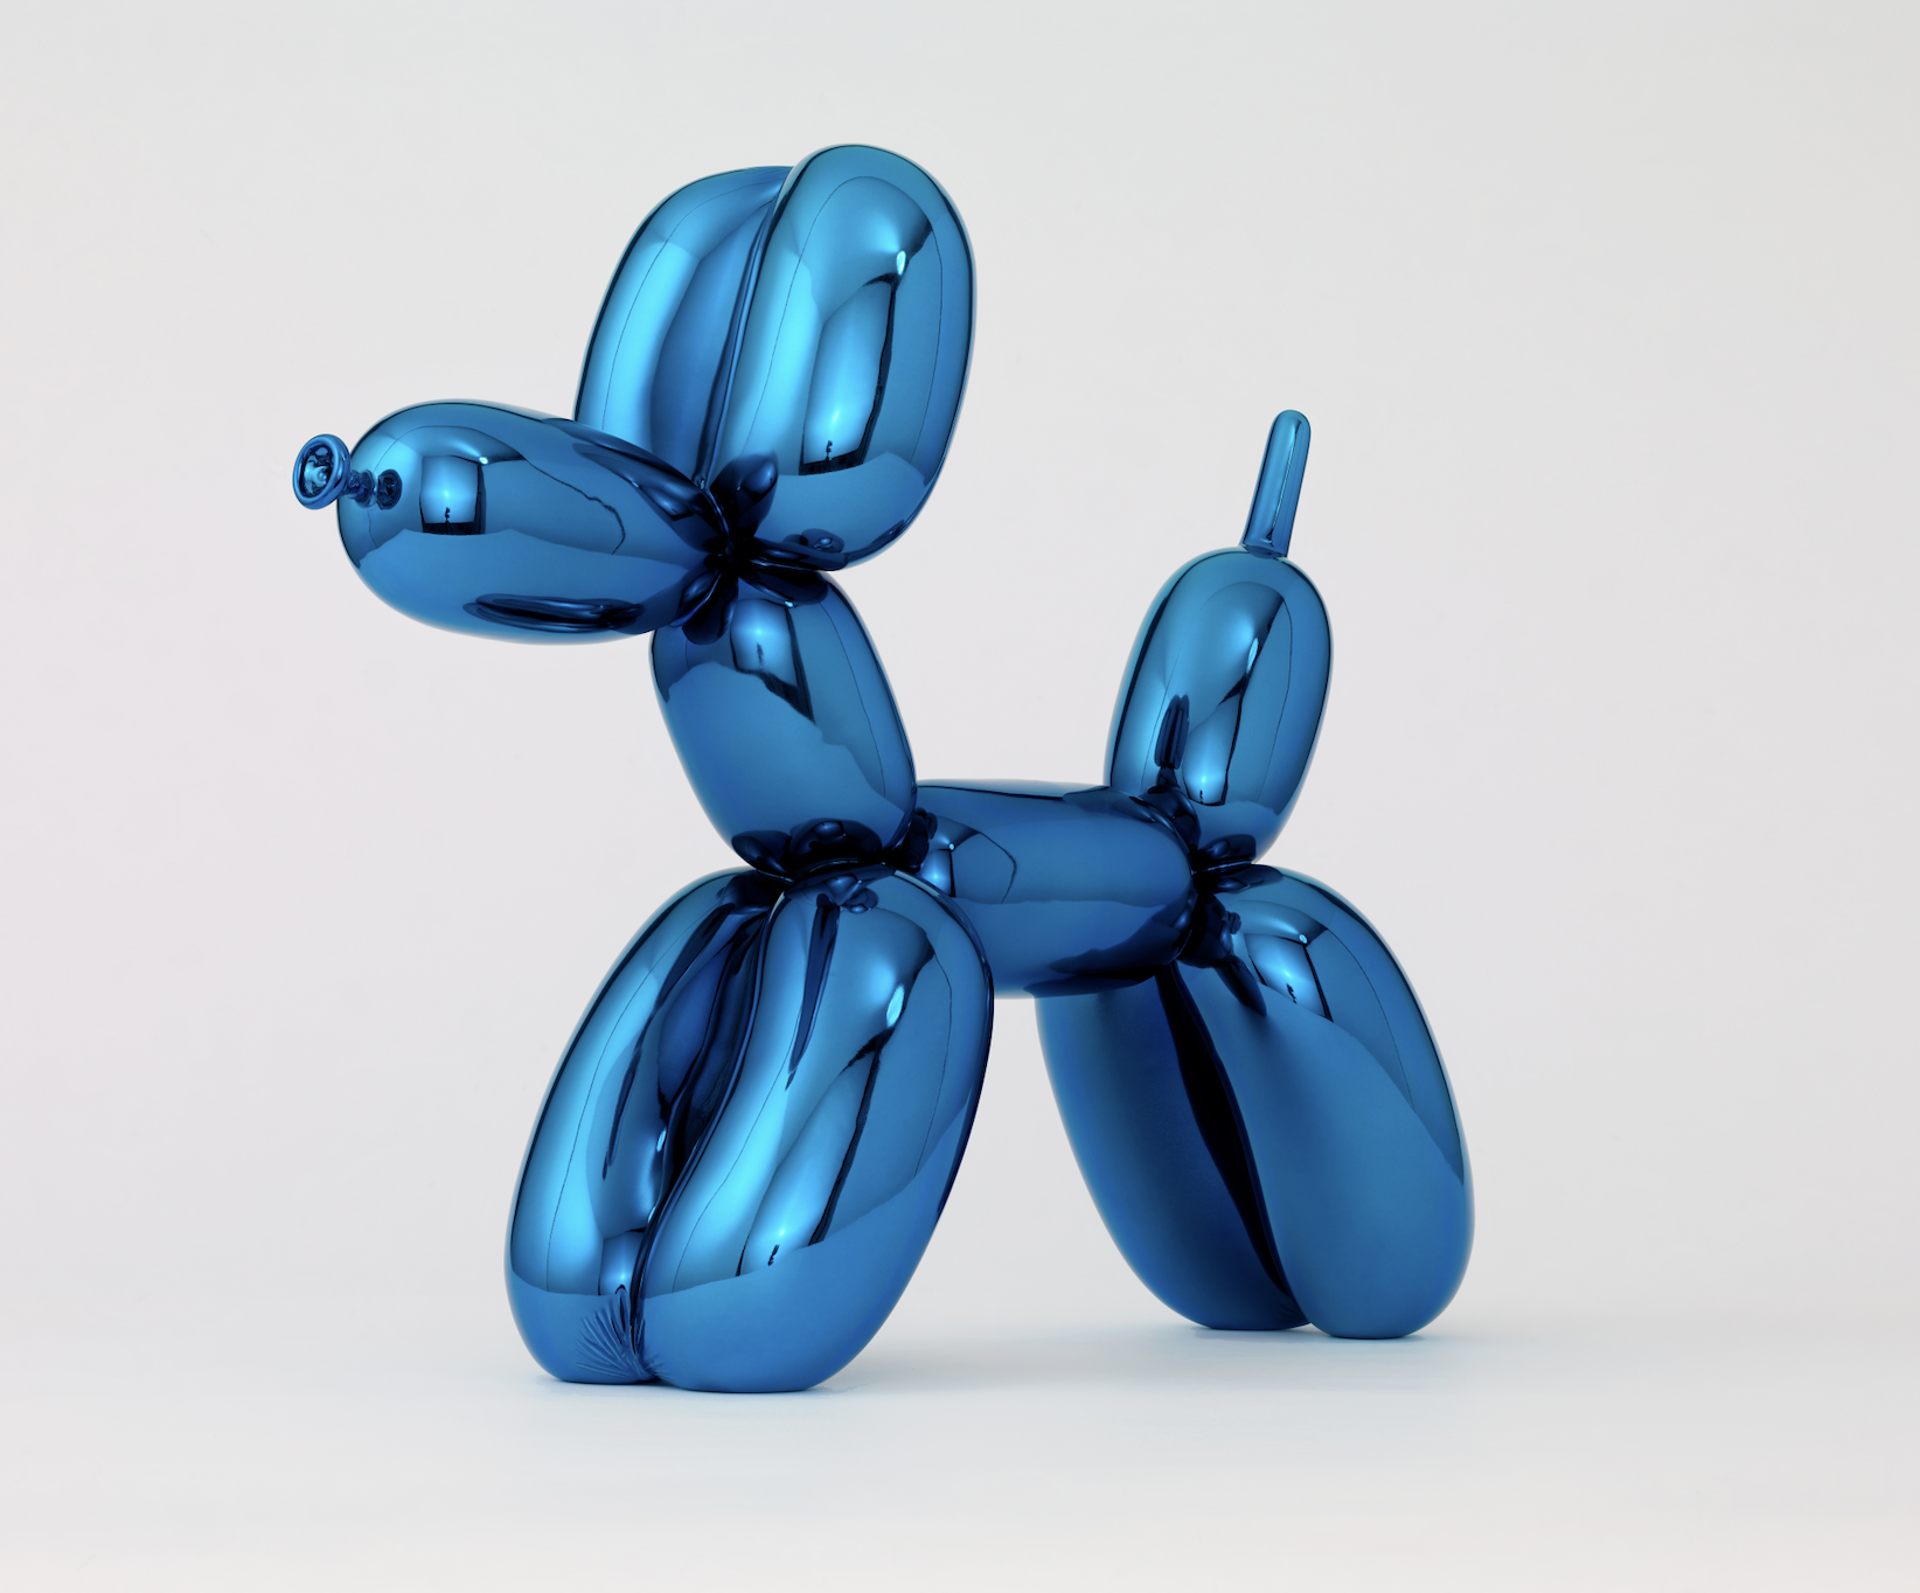 Balloon Dog (Blue) By Jeff Koons by Jeff Koons